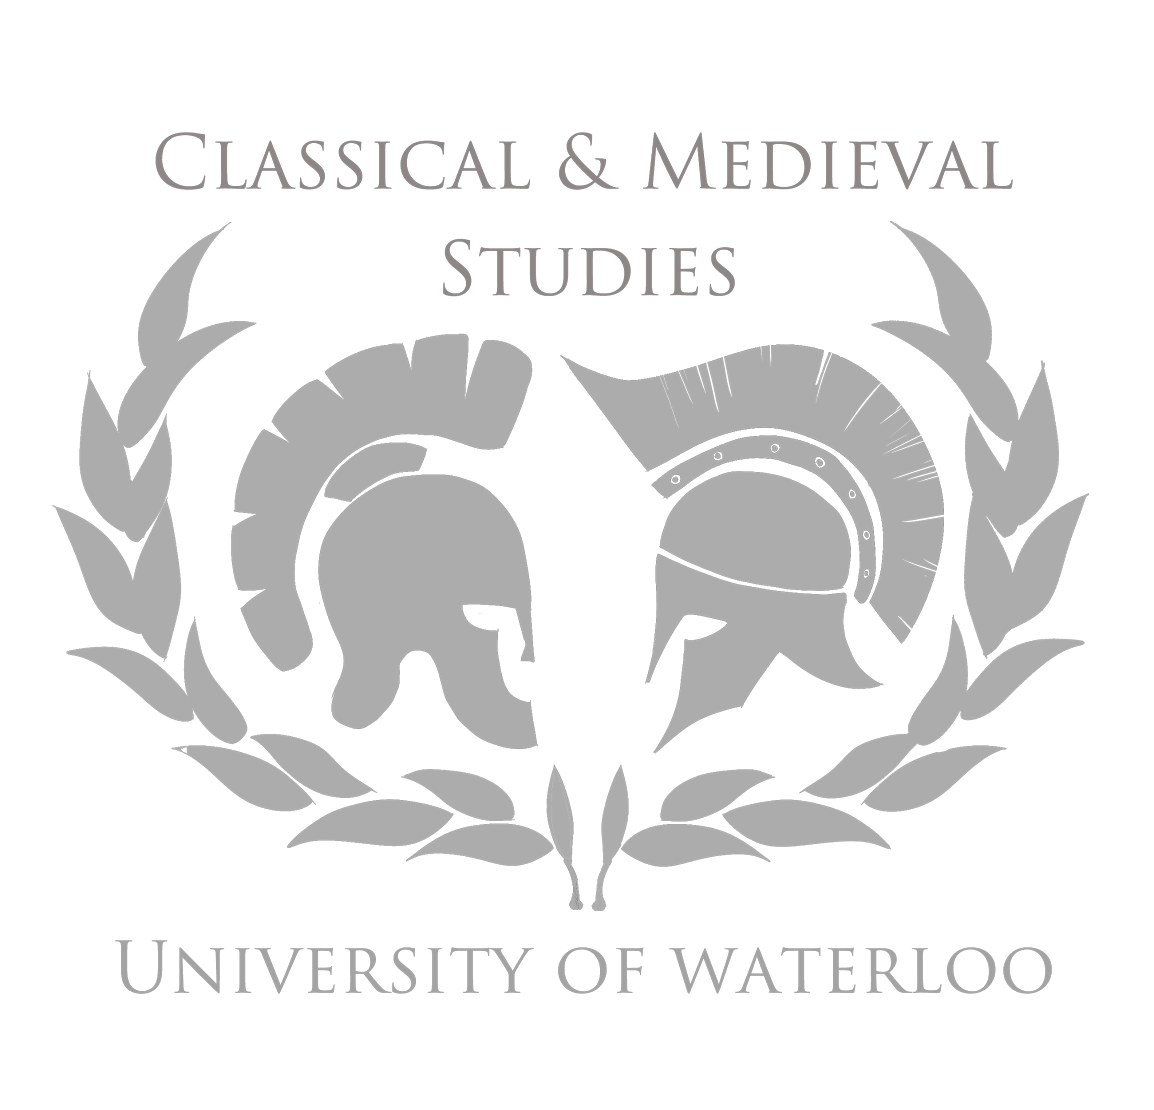 Classics and medieval